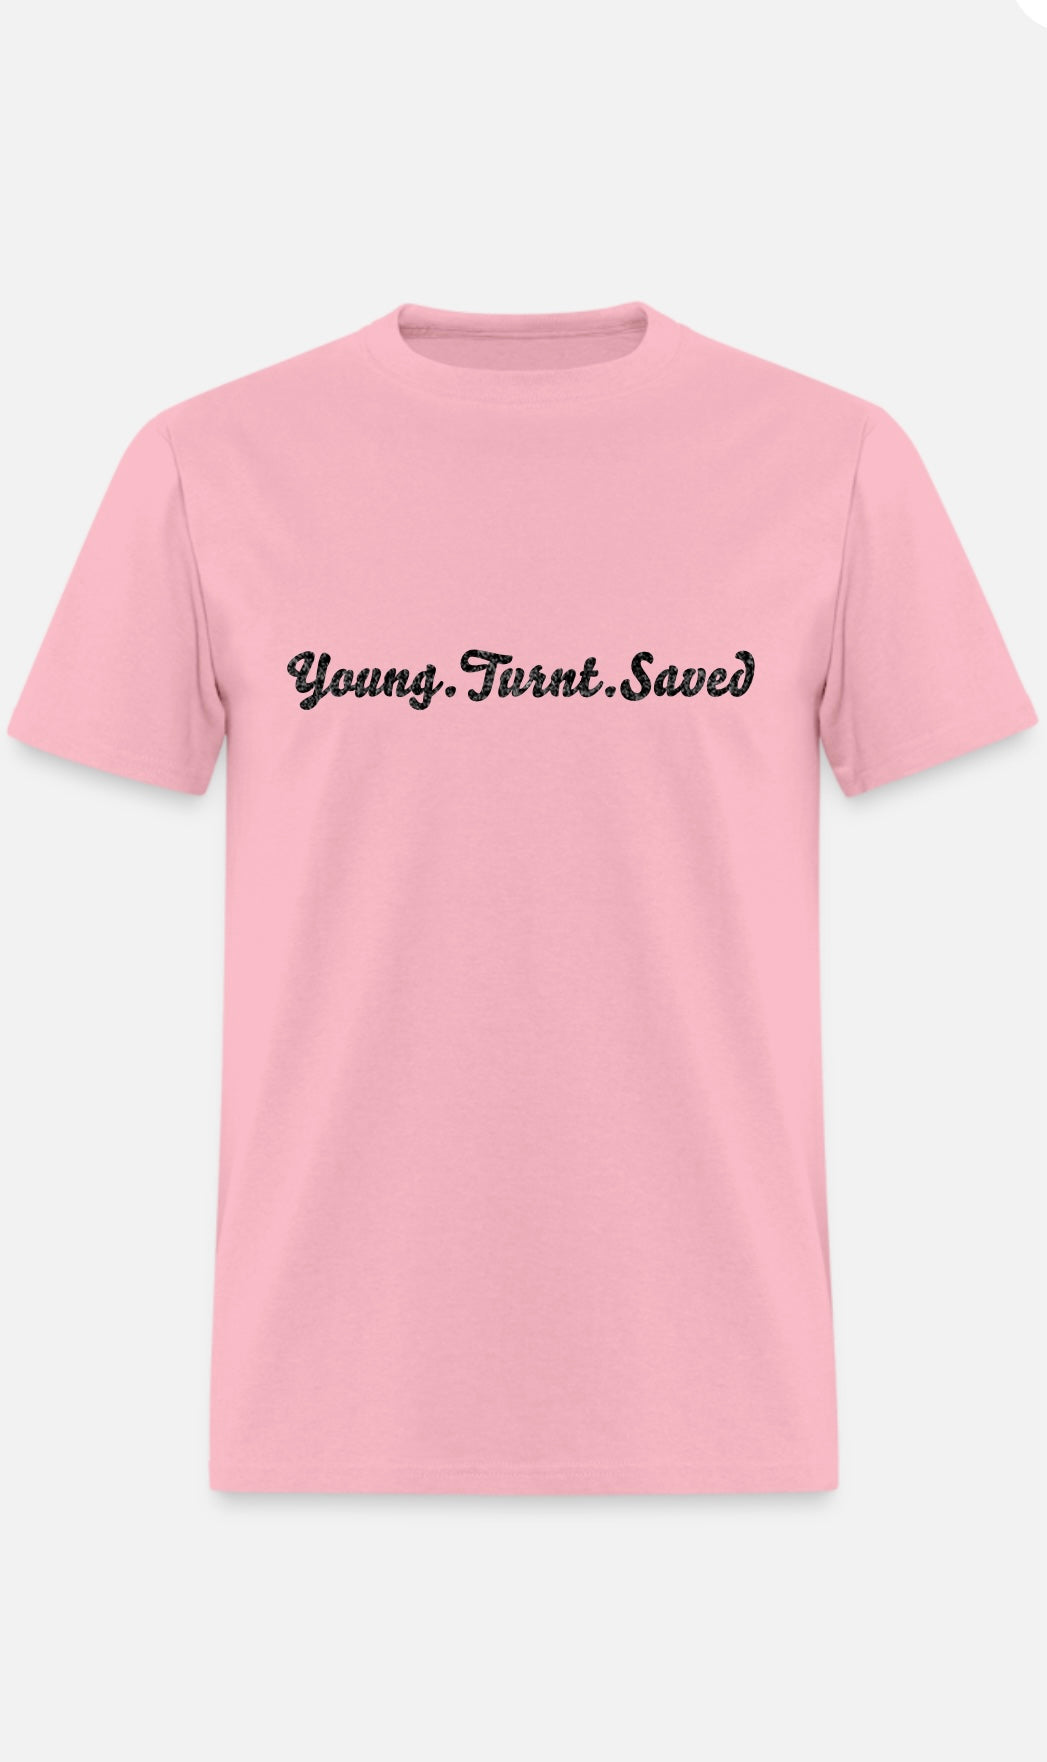 young turnt & saved tee